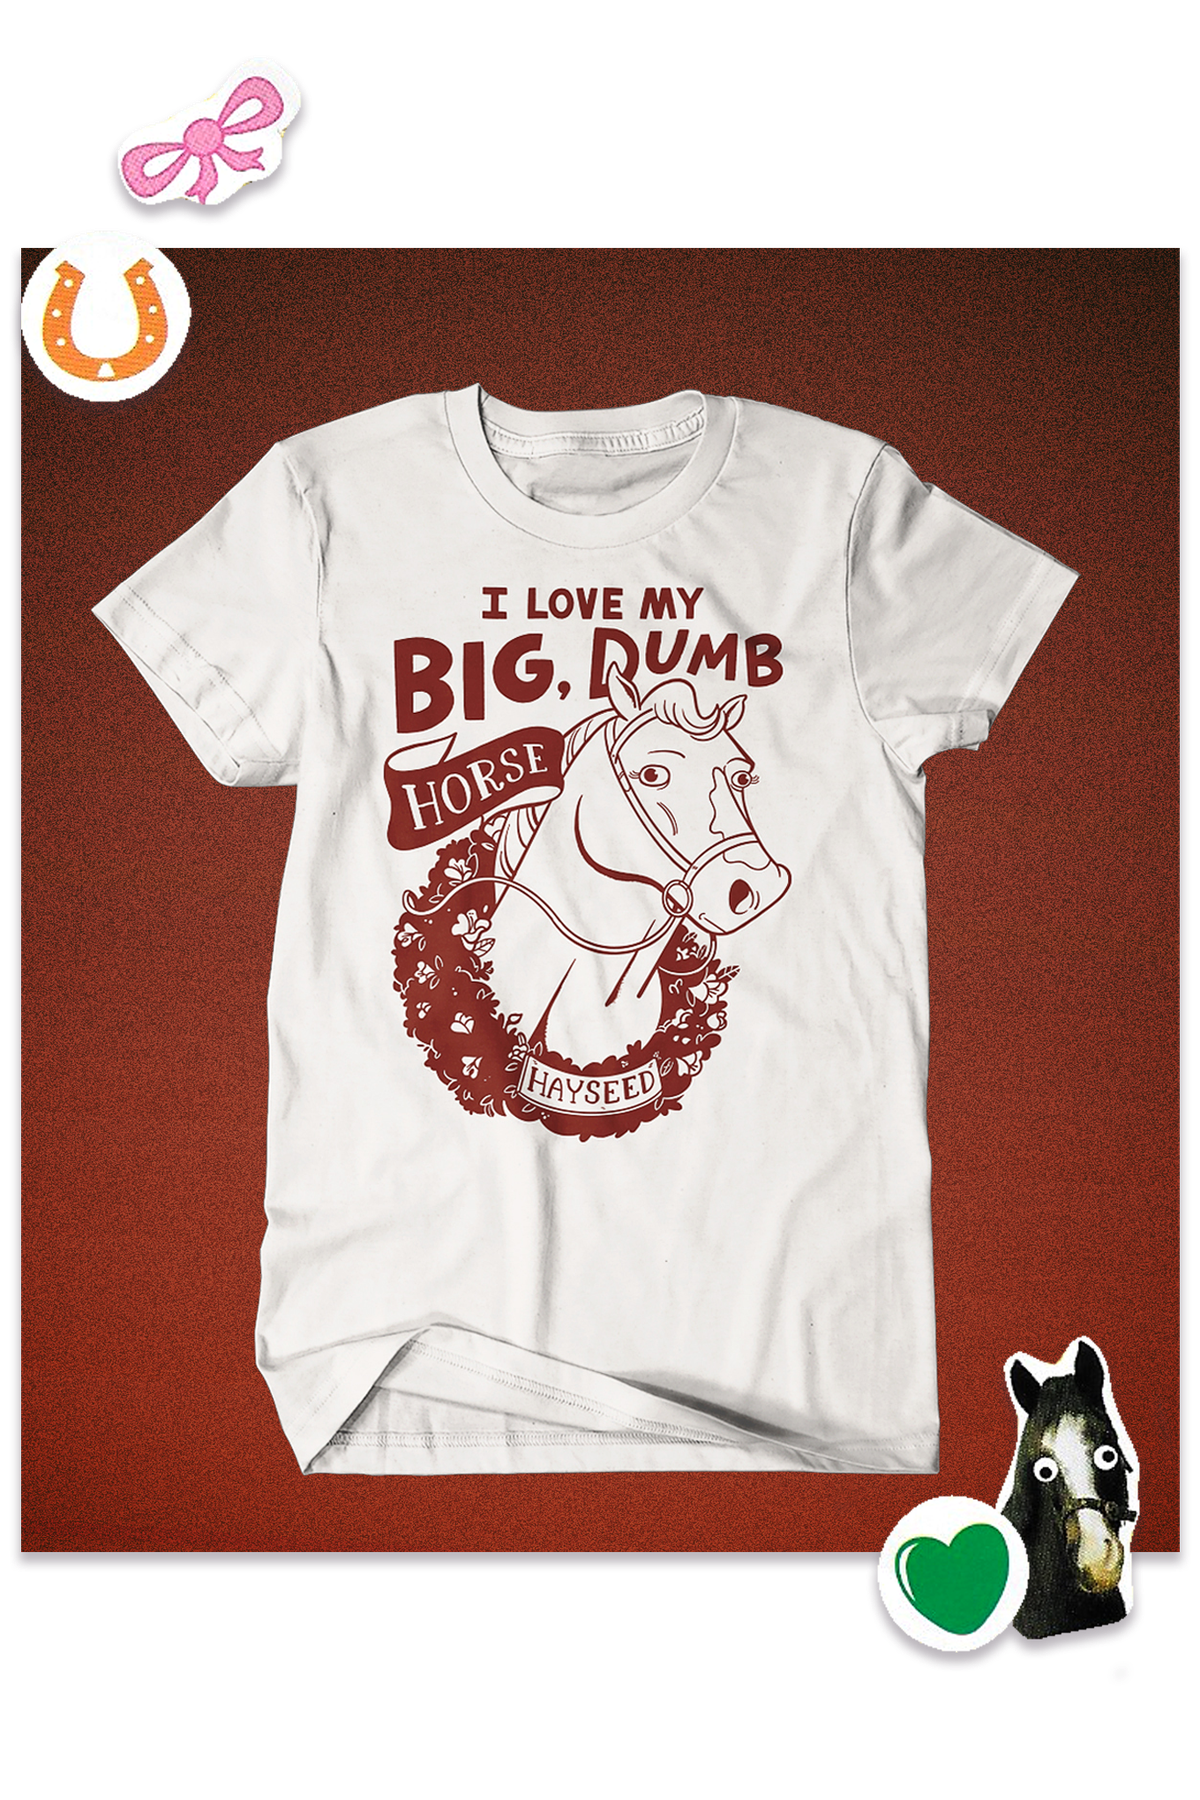 Photo of t-shirt with a cartoon horse and the words “I love my big dumb horse”